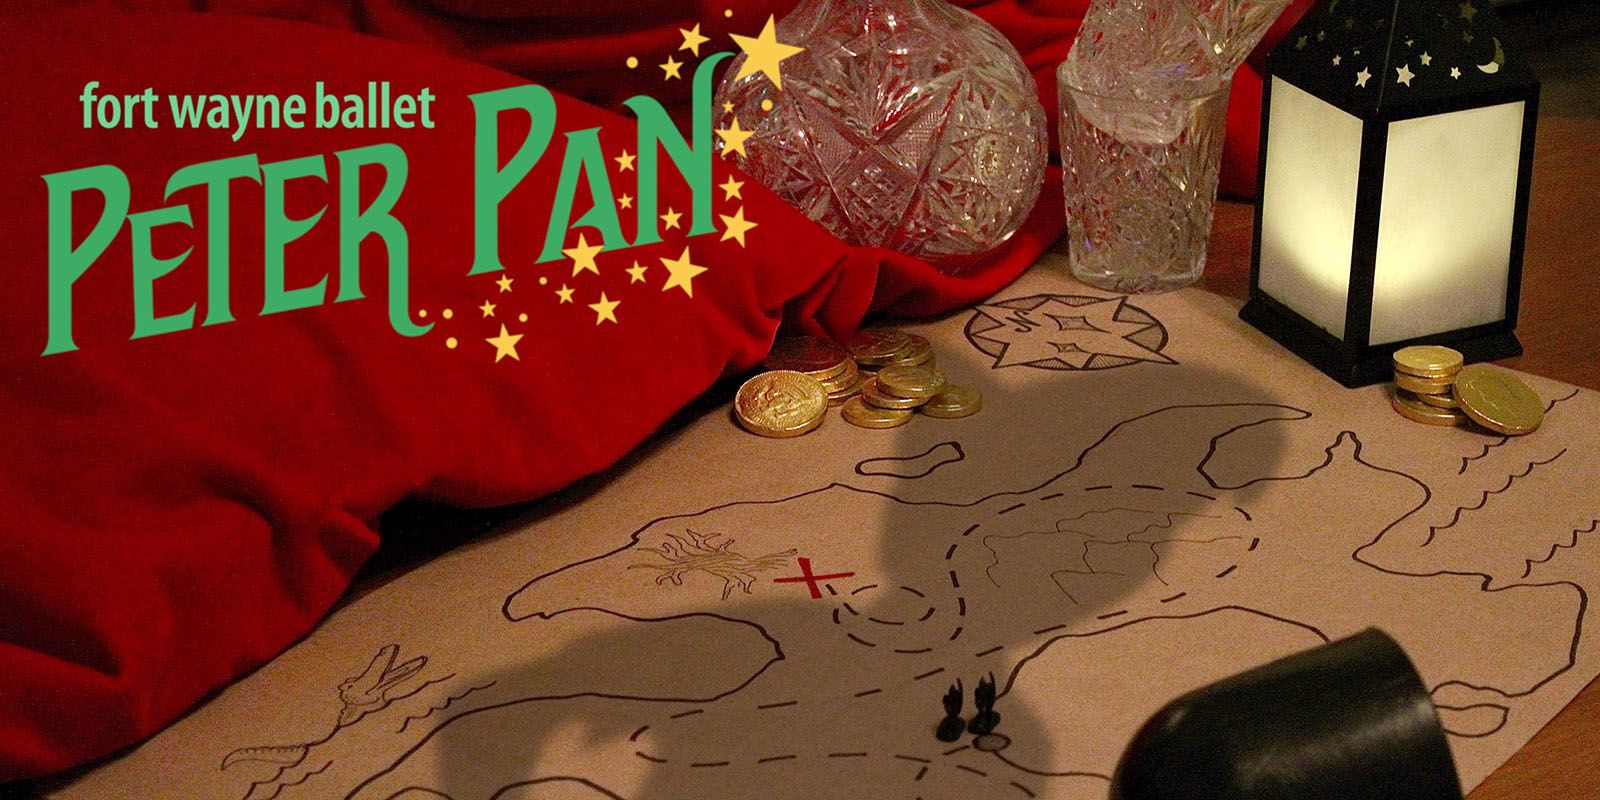 Fort Wayne Ballet's youth company will put on "Peter Pan."